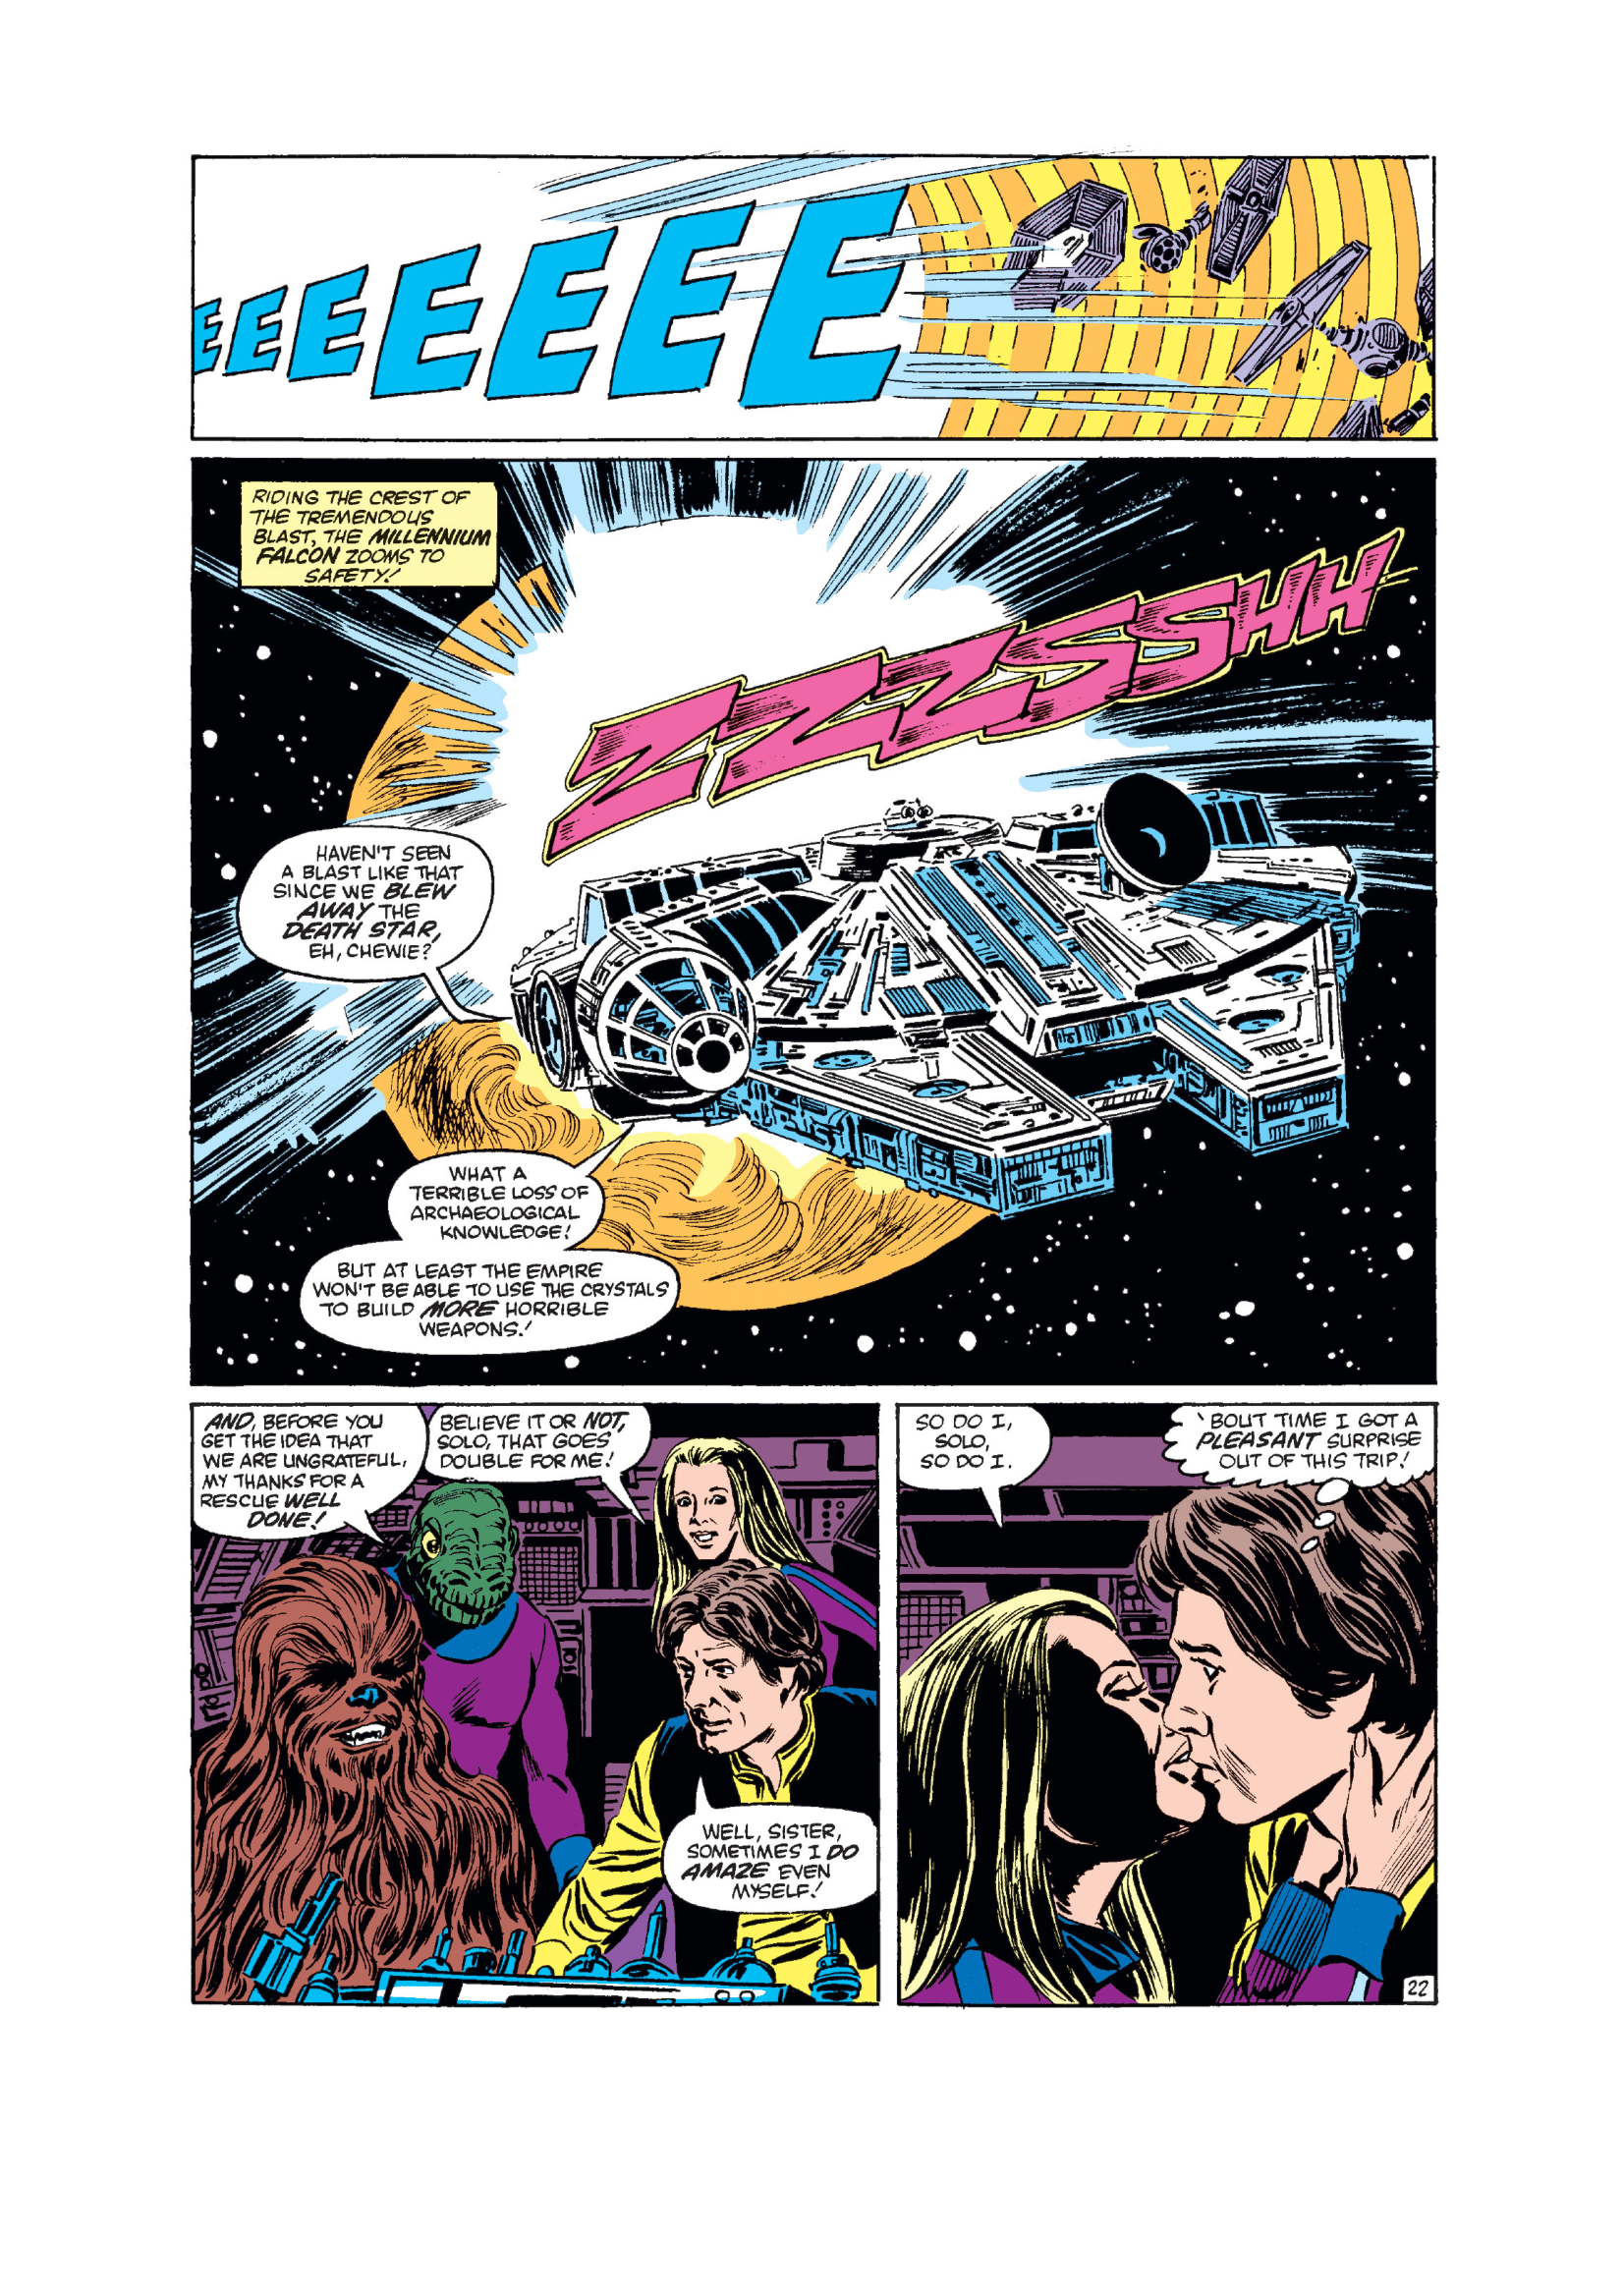 Star Wars (1977) Issue #_84 - Read Star Wars (1977) Issue #_84 comic online in high quality-46.png